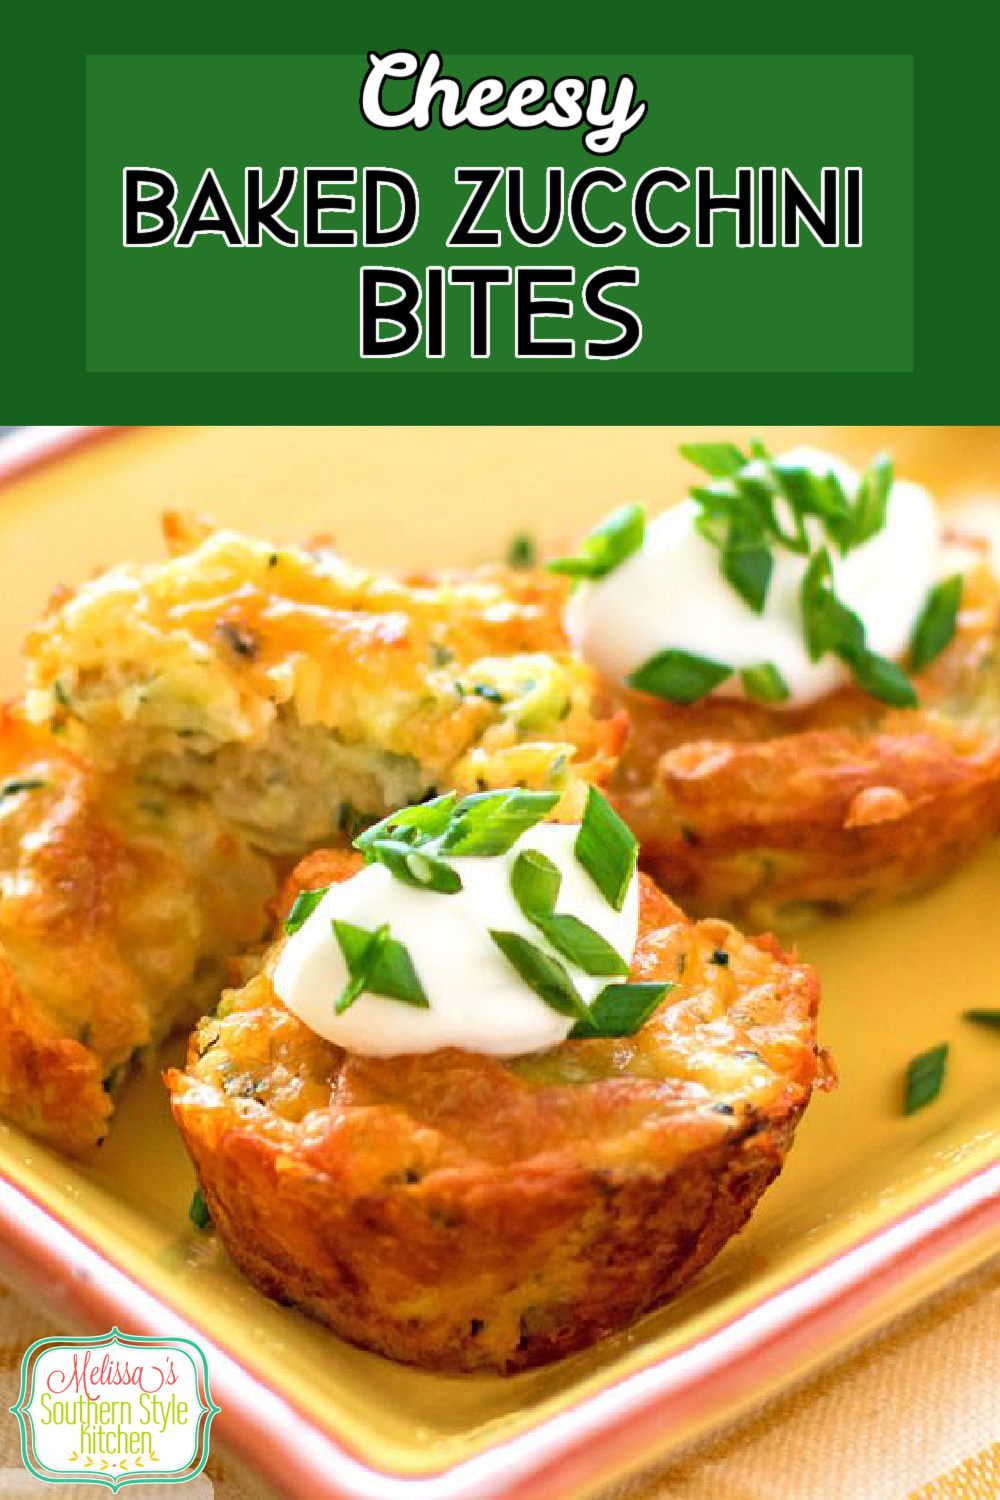 These cheesy mini zucchini bites are like peanuts, you can't stop at one! #zucchini #zucchinibites #zucchinimuffins #cheddarcheese #appetizers #squash #minimuffins #sidedishrecipes #southernfood #southernrecipes